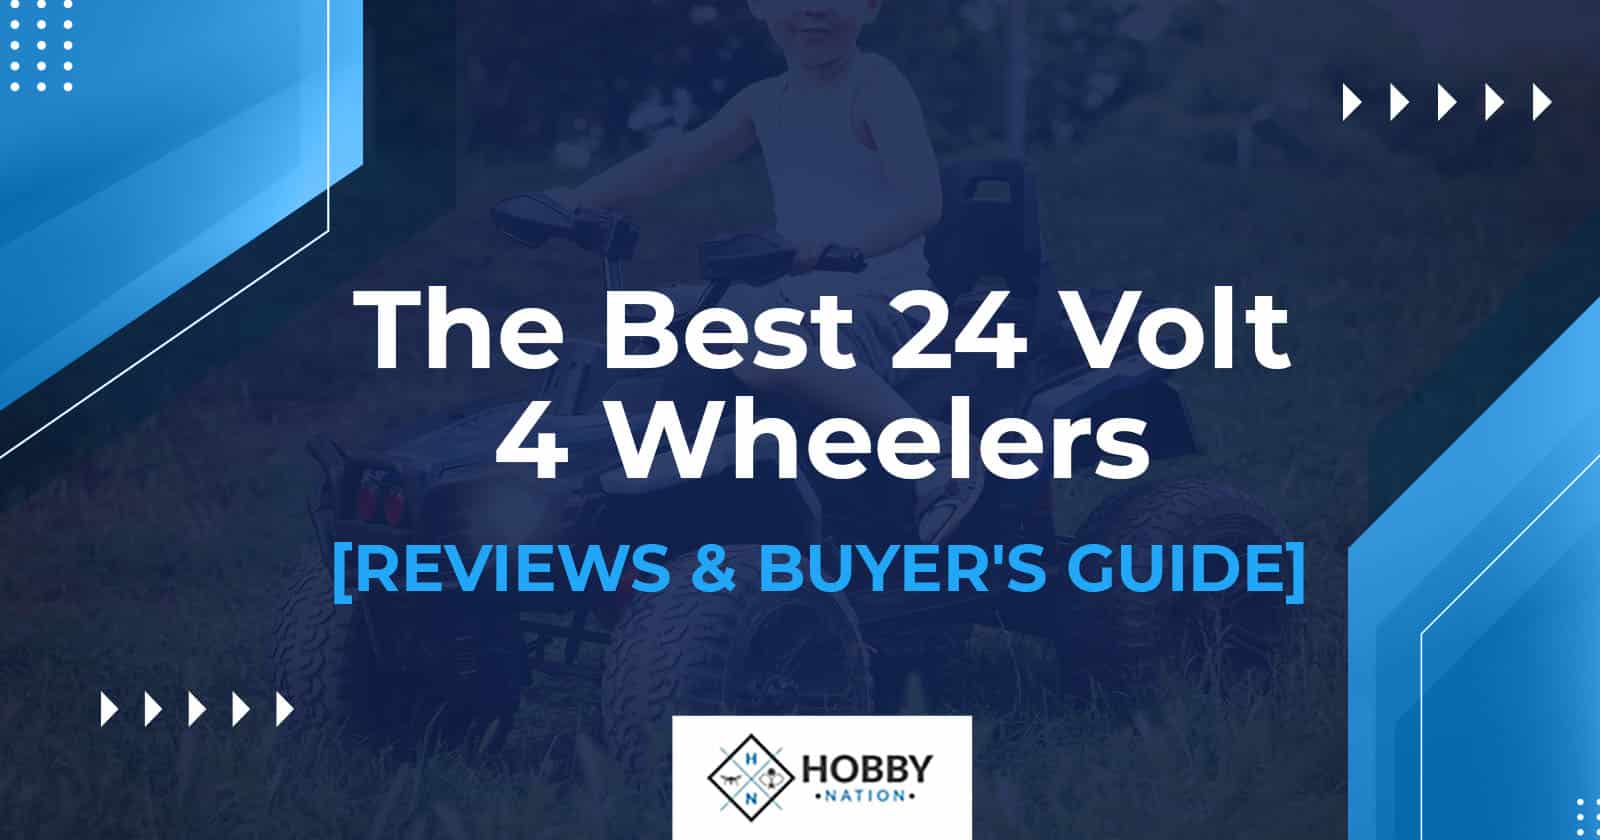 The Best 24 Volt 4 Wheelers [REVIEWS & BUYER'S GUIDE]